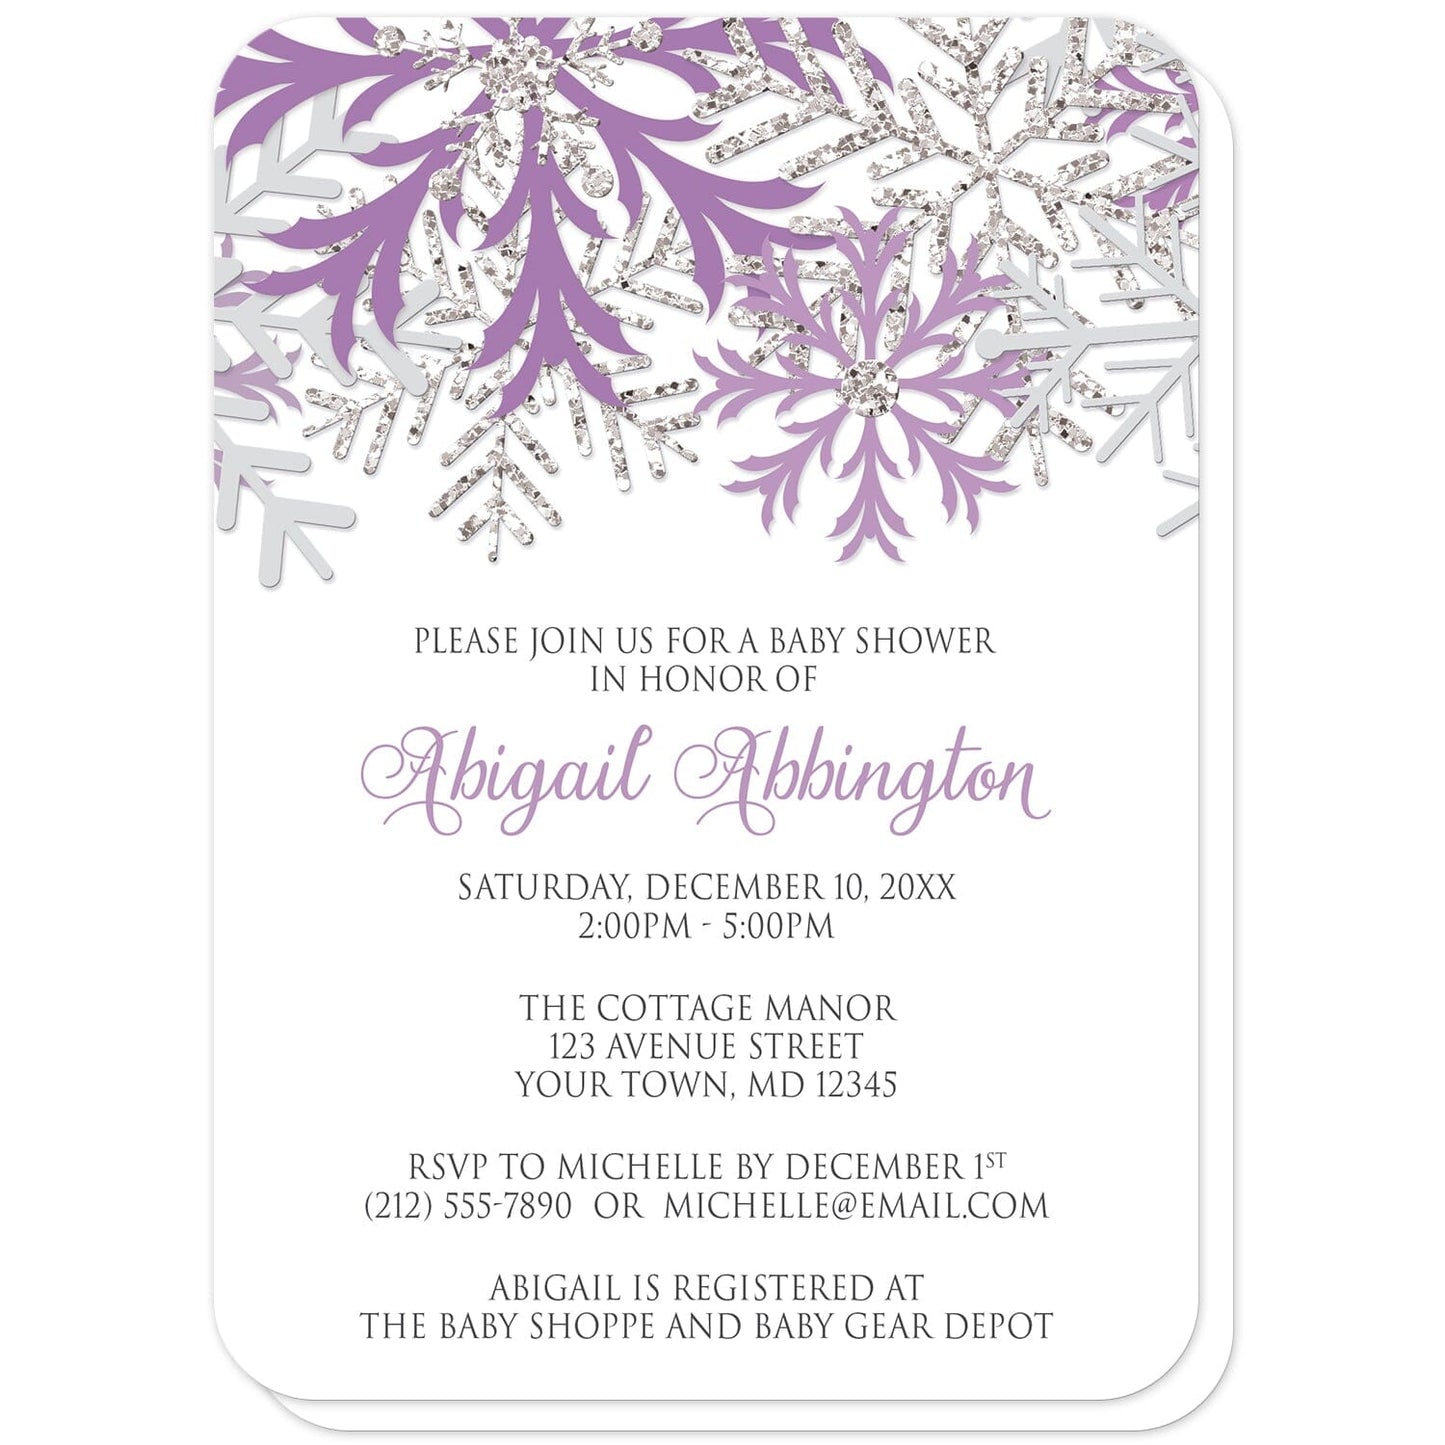 Winter Purple Silver Snowflake Baby Shower Invitations (with rounded corners) at Artistically Invited. Beautiful winter purple silver snowflake baby shower invitations designed with purple, light purple, silver-colored glitter-illustrated, and light gray snowflakes along the top over a white background. Your personalized baby shower celebration details are custom printed in purple and gray below the pretty snowflakes.